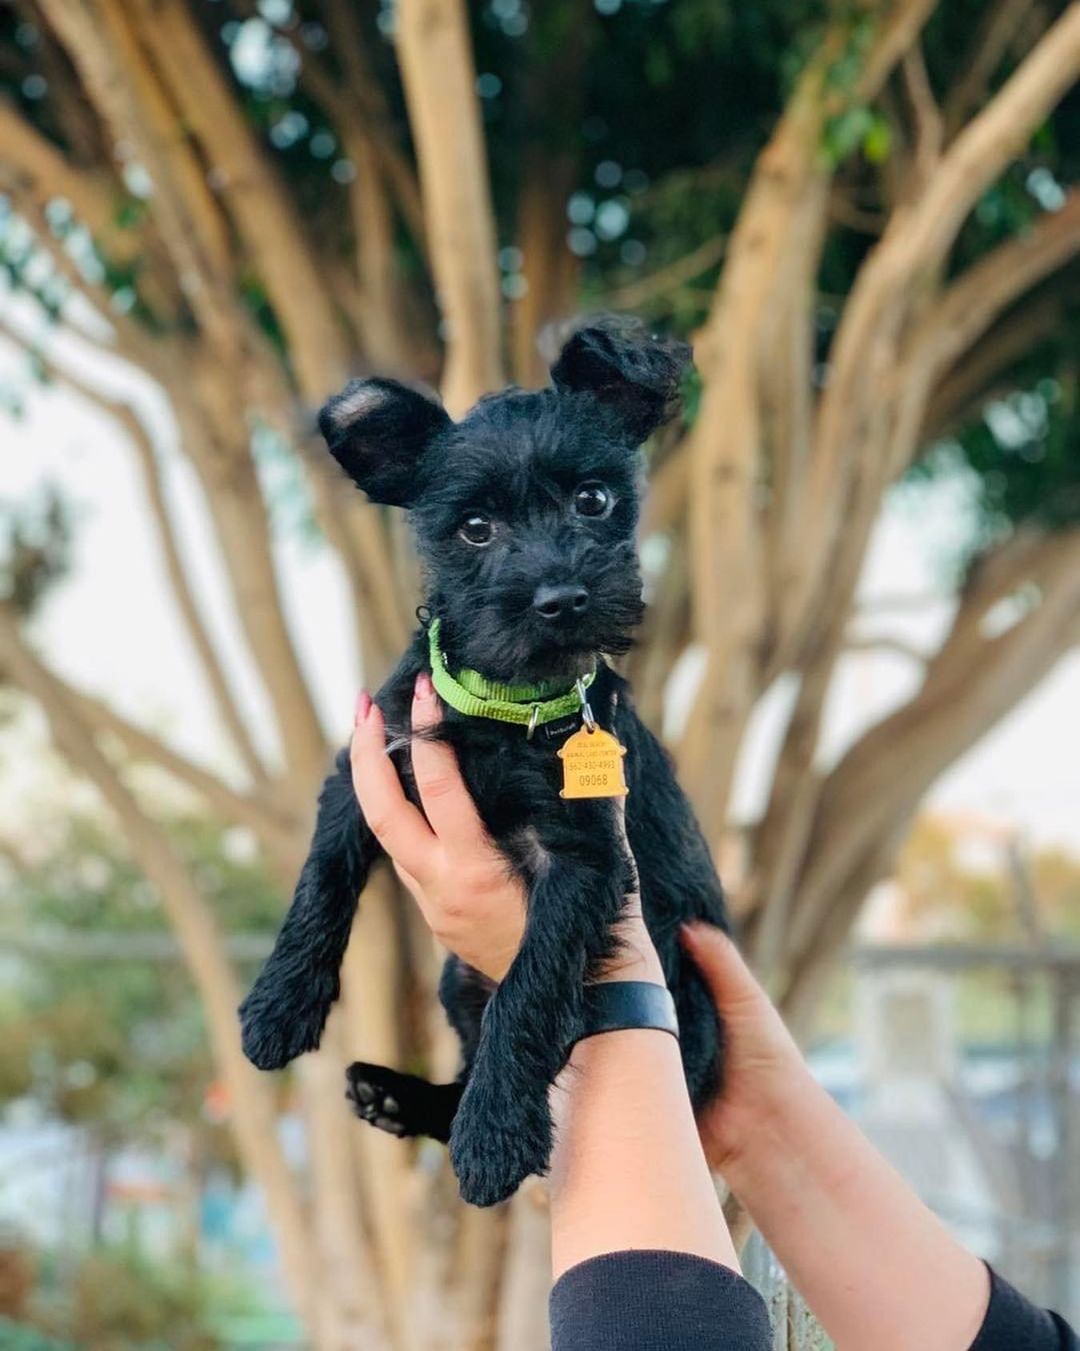 Who’s this new little cutie pie??? Introducing… ELSIE!  She is a 3-month-old Yorki/Chi mix and cute as can be.  She lives her best puppy life playing, biting and being the silliest little thing.  Do you have the time and patience for a handful of a girl Elsie?? 💕

Click on the link in our Bio for more information.